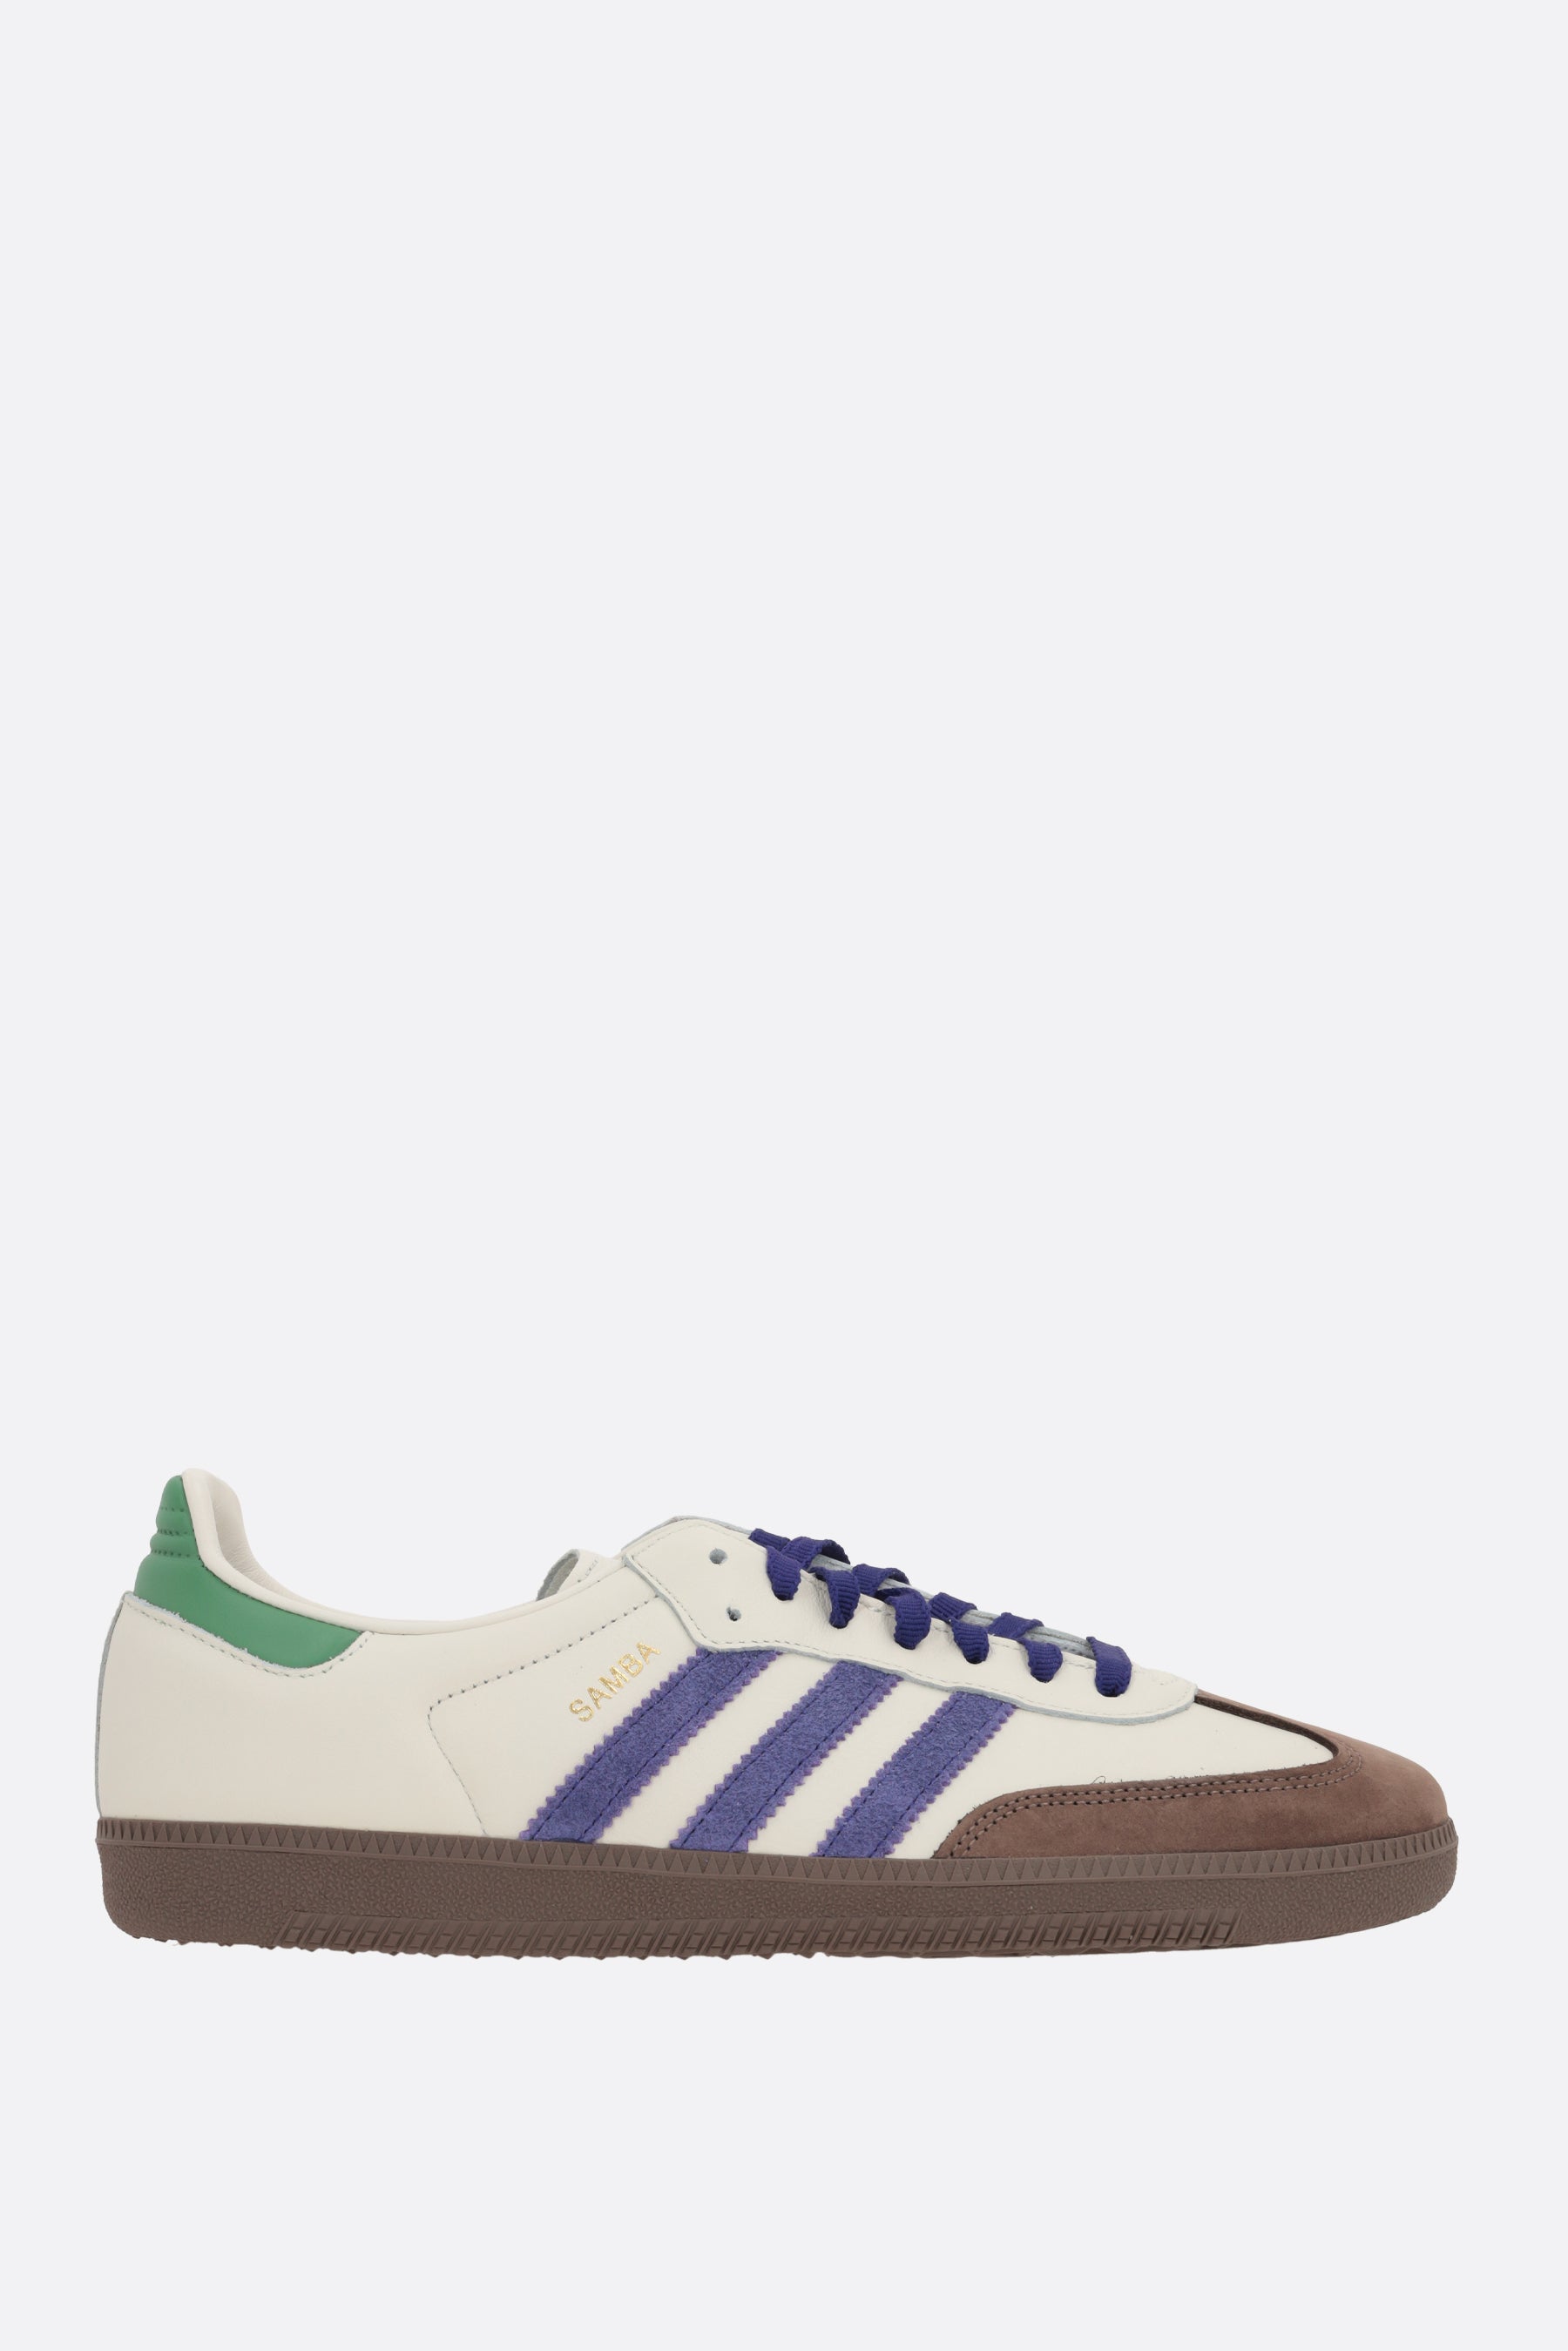 Samba OG W smooth leather sneakers